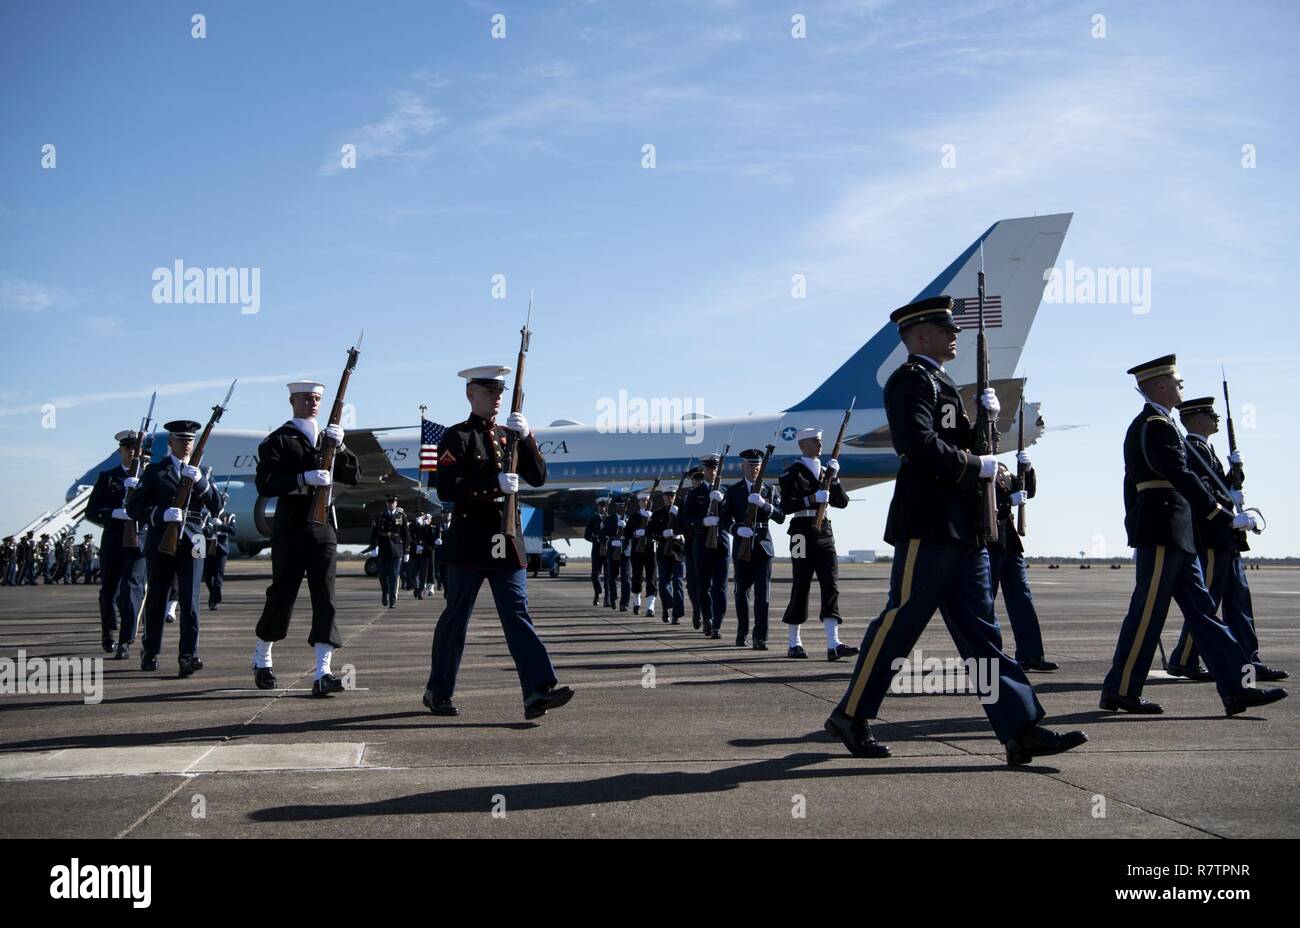 U.S. service members with the Joint Forces Honor Guard exit after participating in a departure ceremony for former President George H.W. Bush in front of the Special Air Mission 41 aircraft at Ellington Field Joint Reserve Base in Houston, Texas, Dec. 3, 2018. Nearly 4,000 military and civilian personnel from across all branches of the U.S. armed forces, including Reserve and National Guard components, provided ceremonial support during George H. W. Bush’s, the 41st President of the United States state funeral. Stock Photo